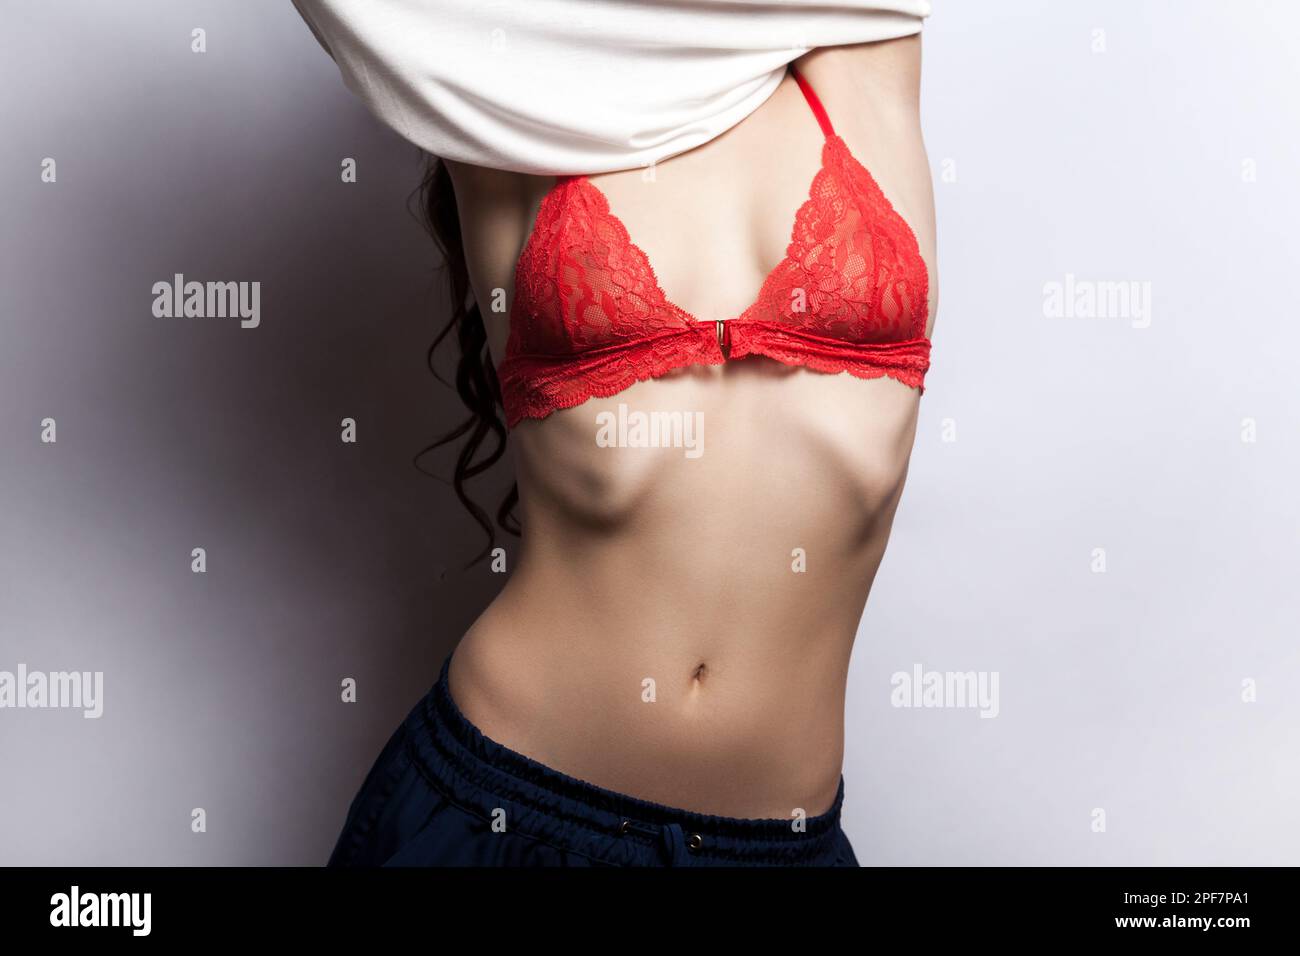 Portrait Of Beautiful Female Model In Bra Stock Photo, Picture and